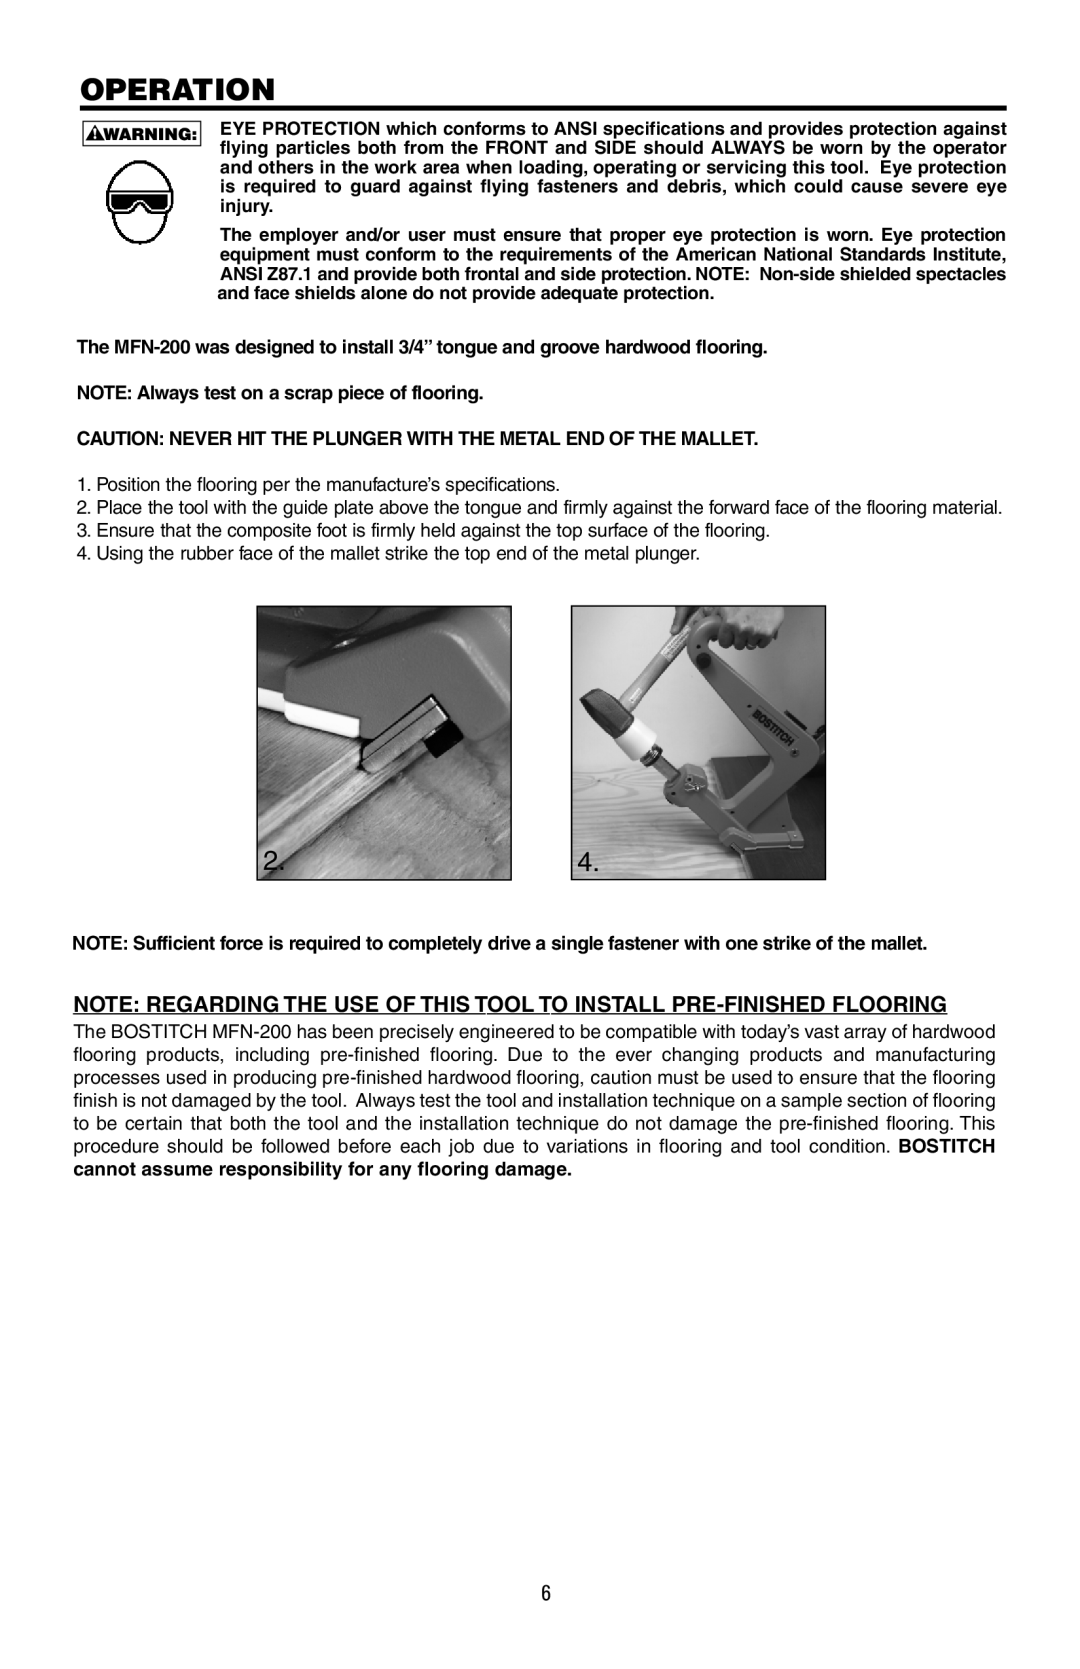 Intec MFN-200 manual Operation, Note Regarding The Use Of This Tool To Install Pre-Finished Flooring 